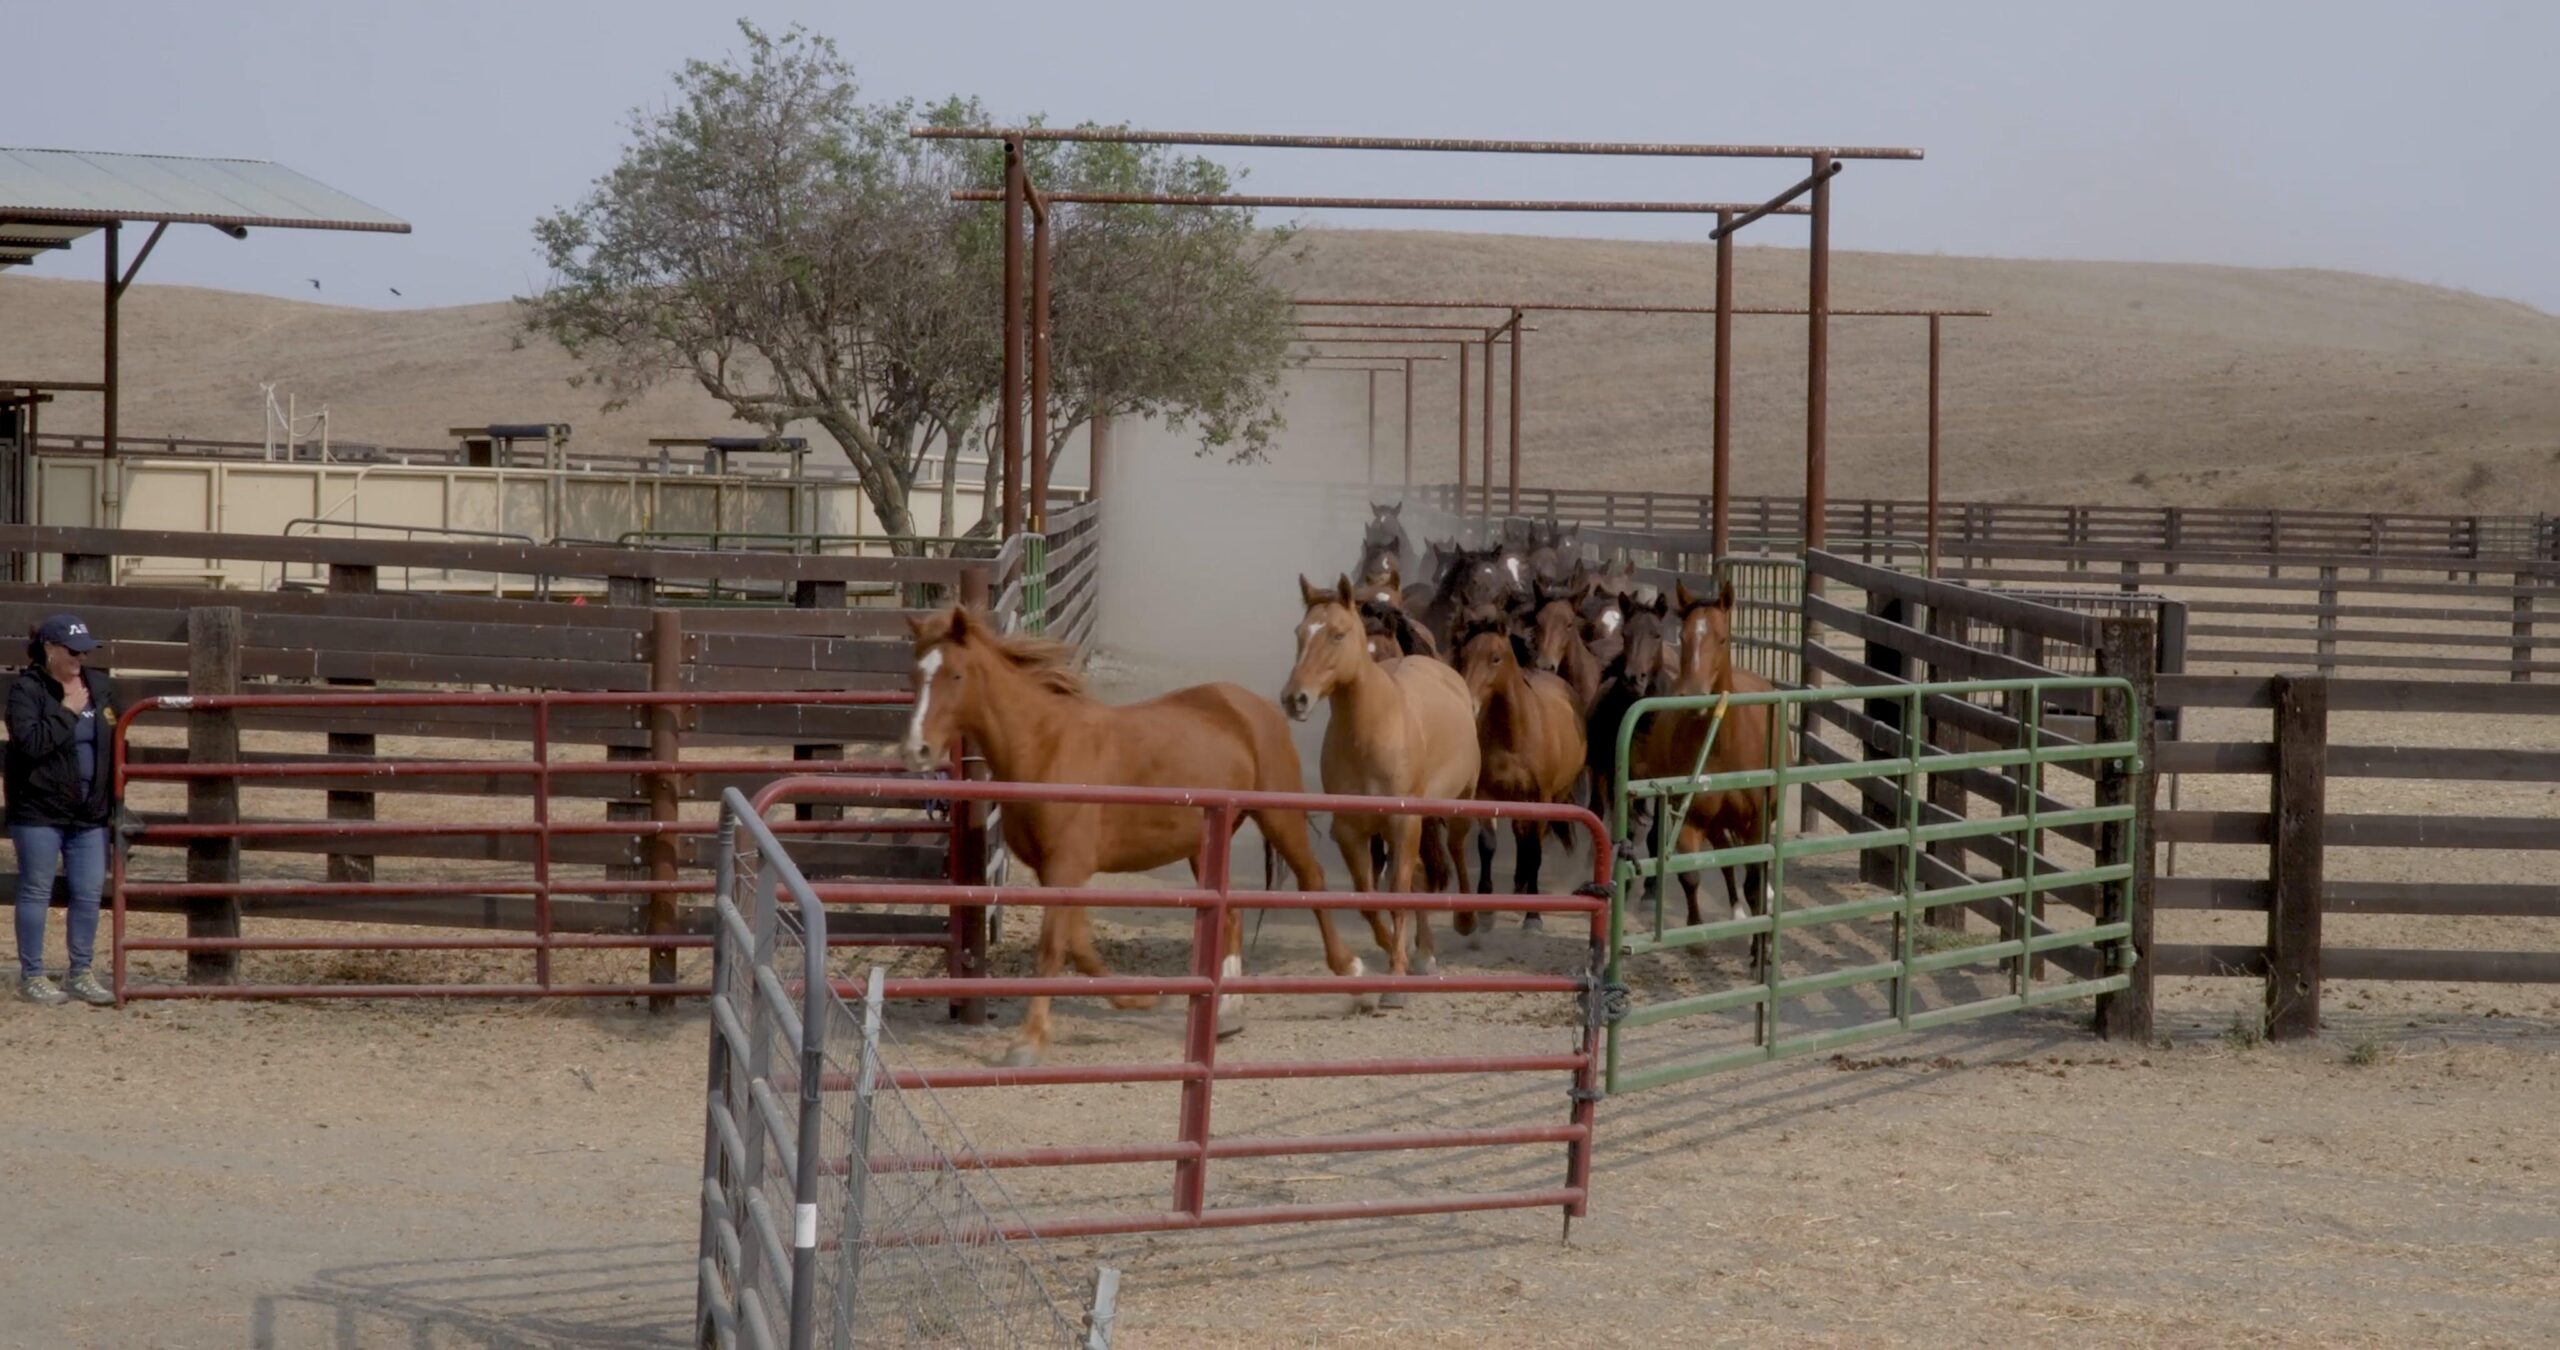 Herd of horses running out of a pen